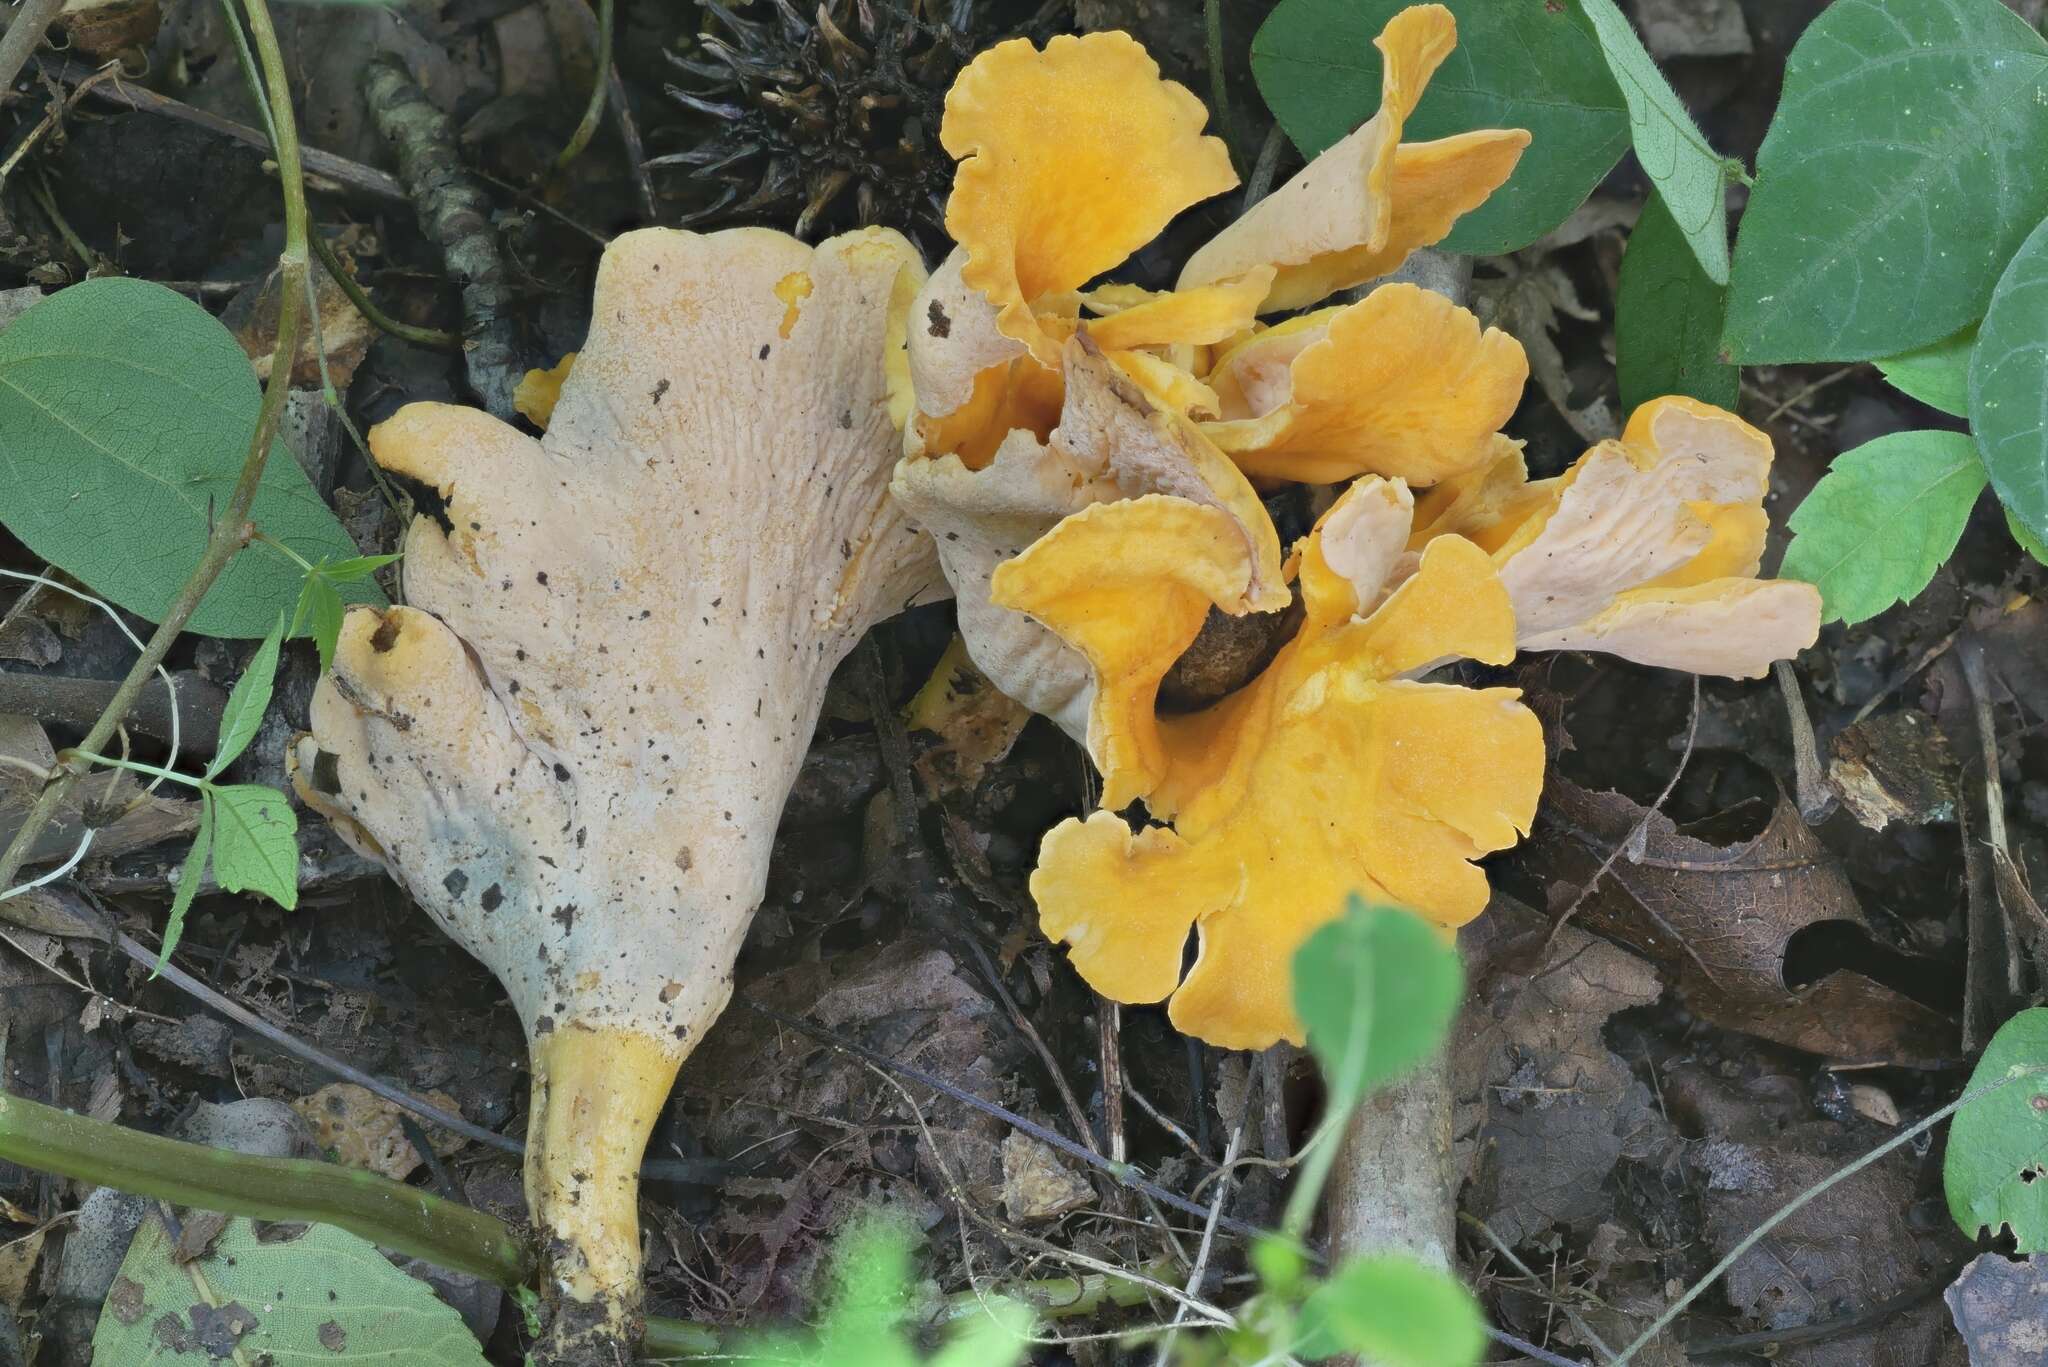 Image de Cantharellus flavolateritius Buyck & V. Hofst. 2016